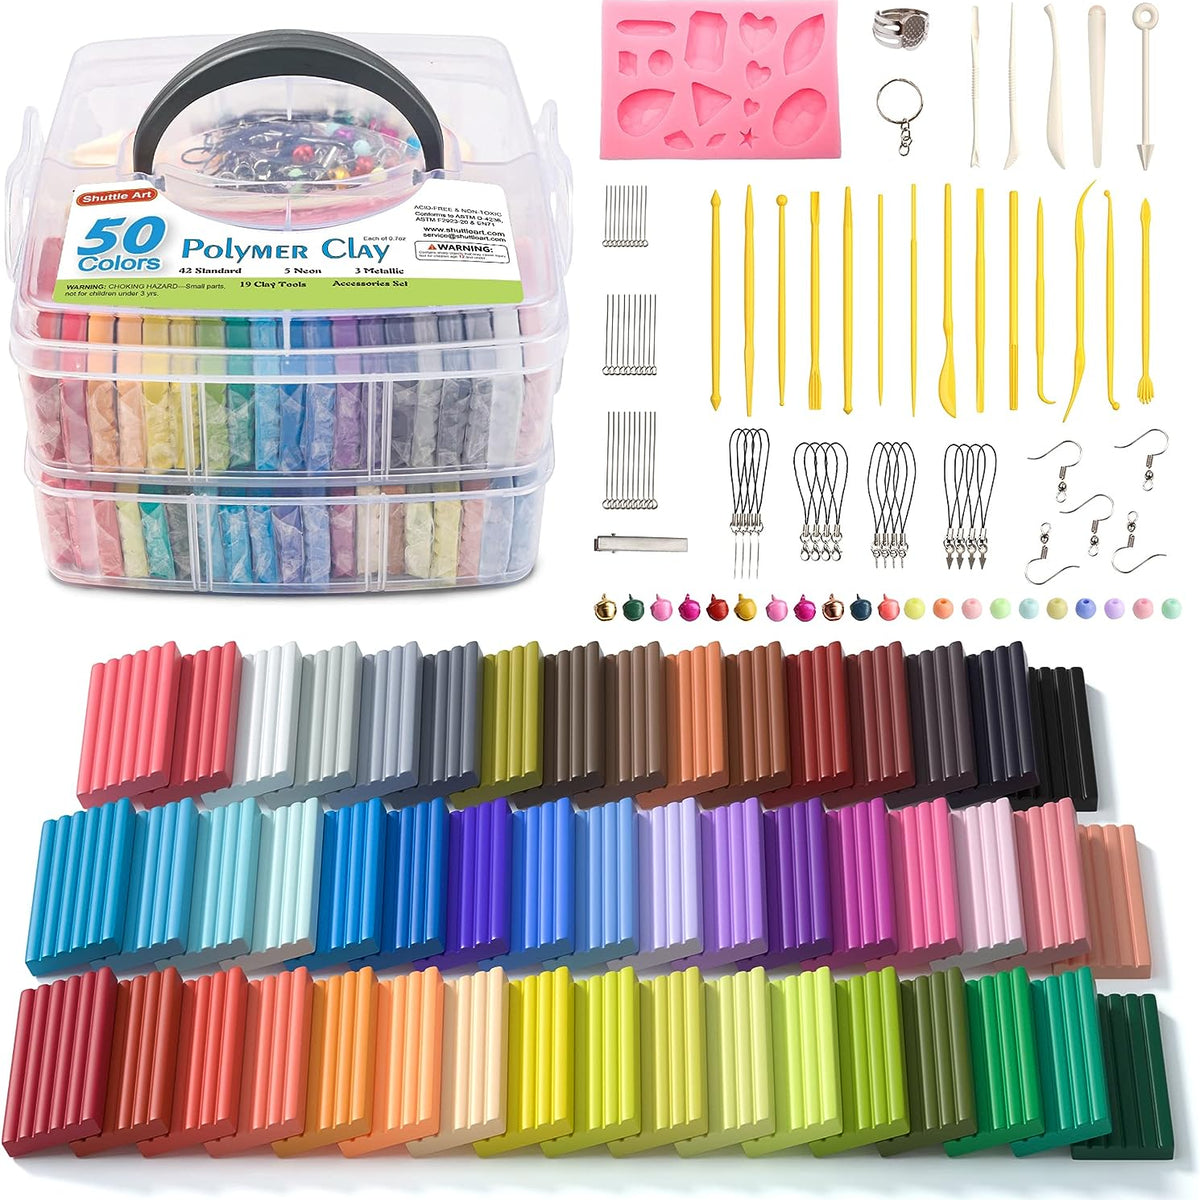 Polymer Clay Kit Sculpting Tool - 50 Colors Modeling Polymer Clay Oven with  19 Sculpting Clay Tools for Kids Polymer Clay Set - Oven Bake Clay Making  Kit Storage Box - Modeling